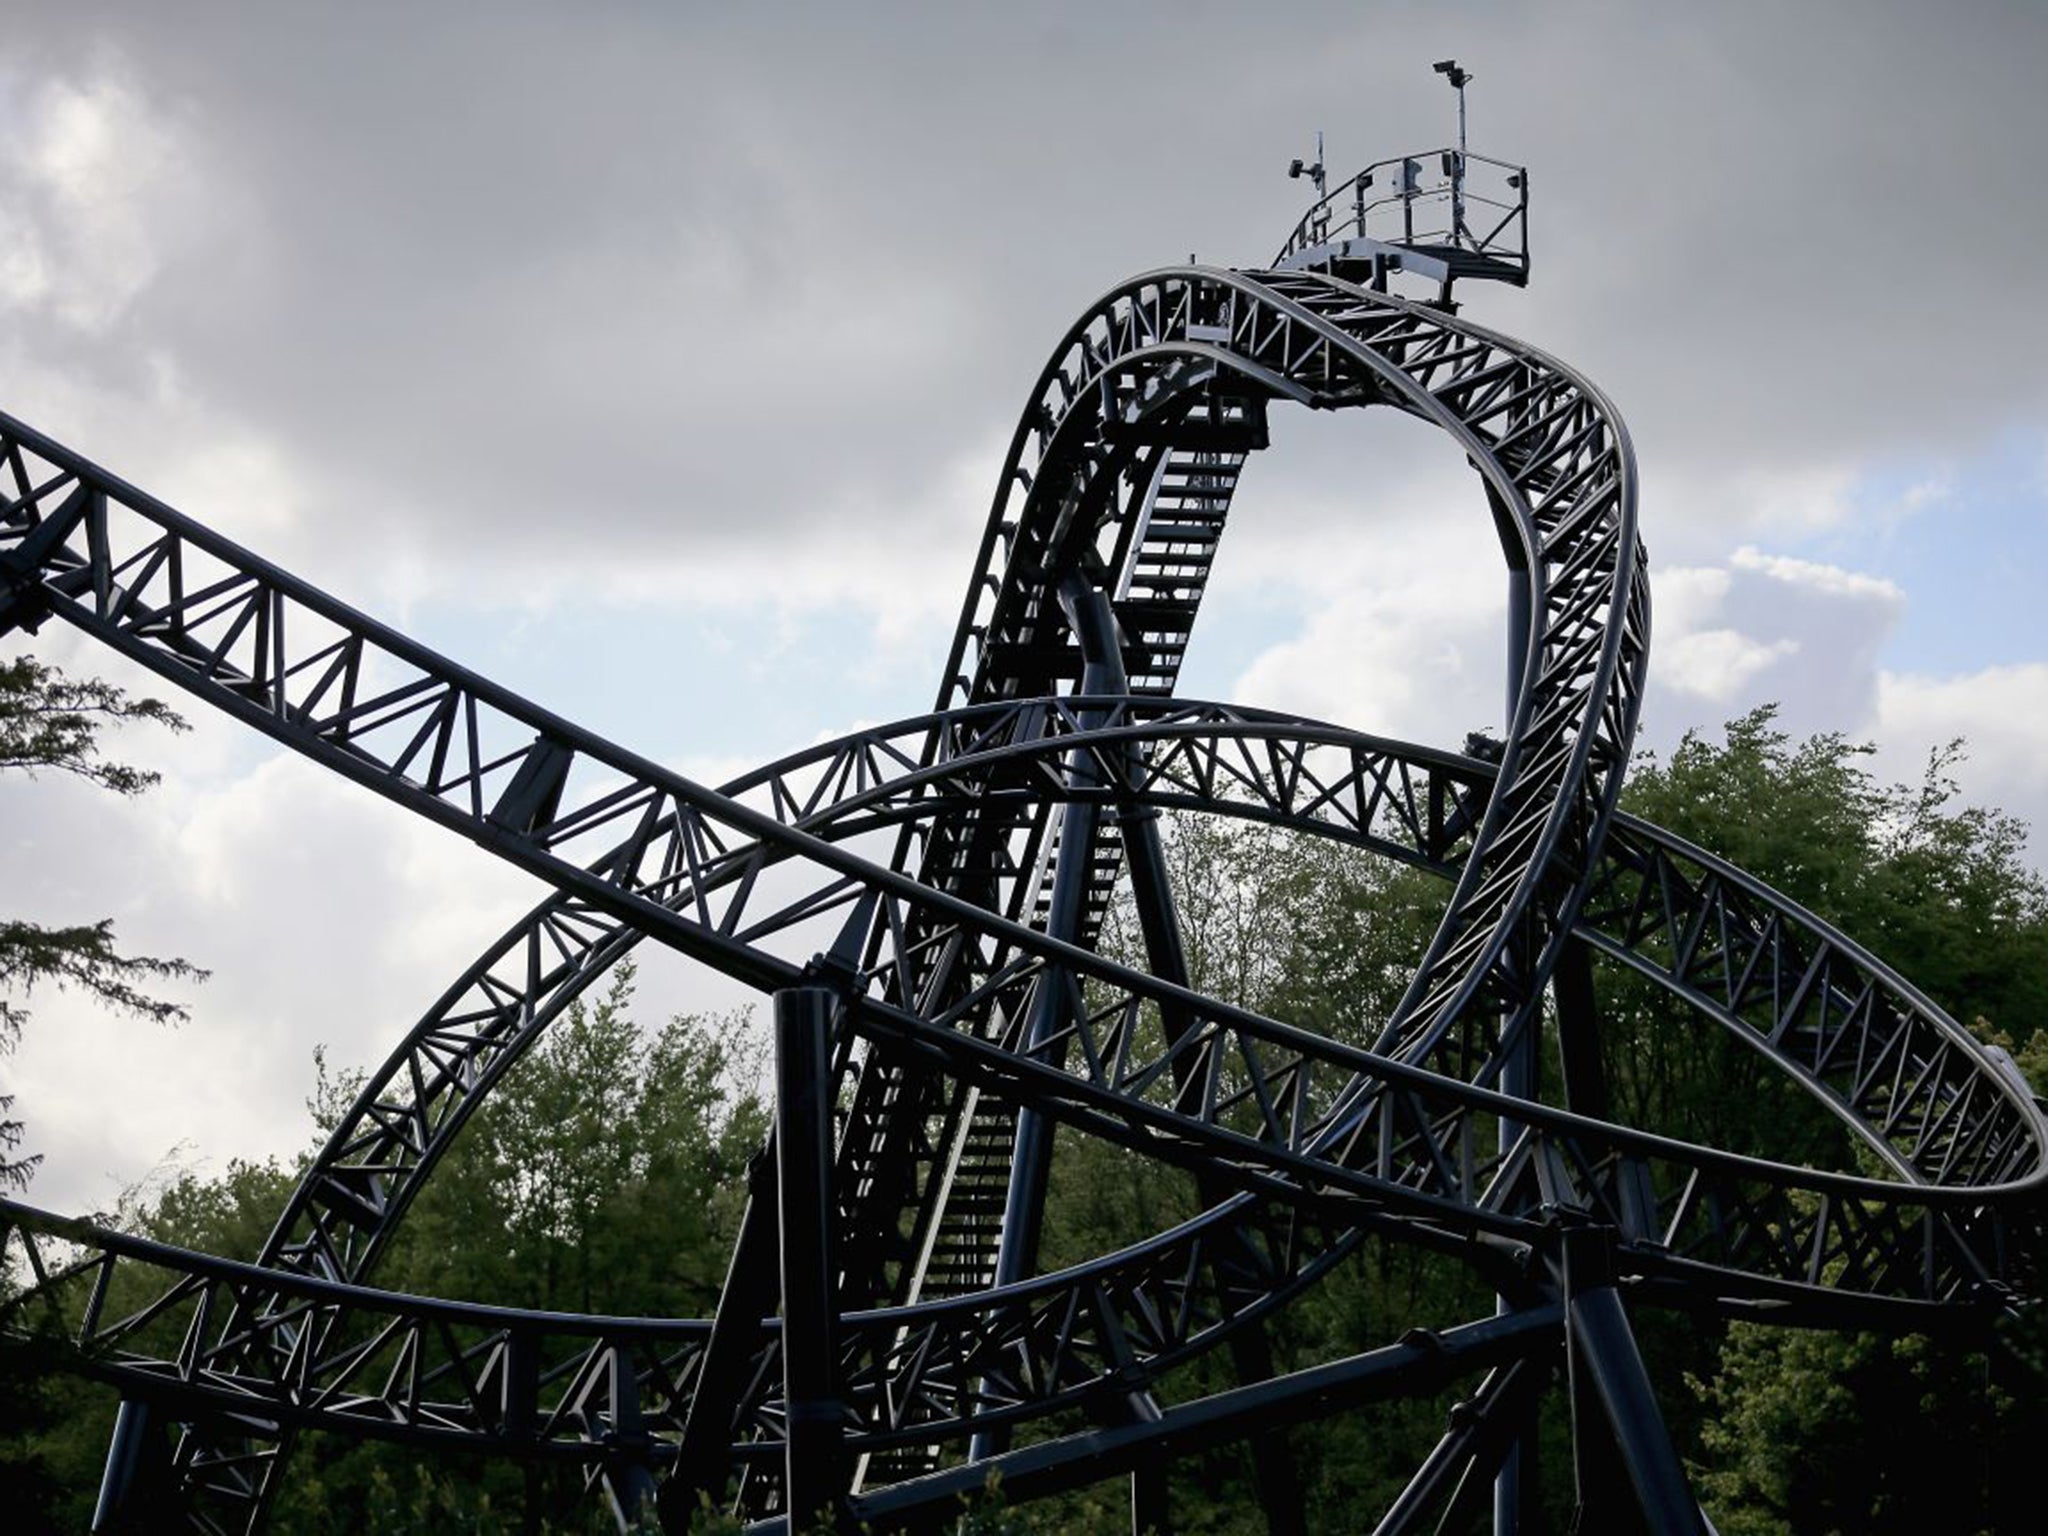 The Smiler ride at Alton Towers, where 16 people were involved in a serious crash